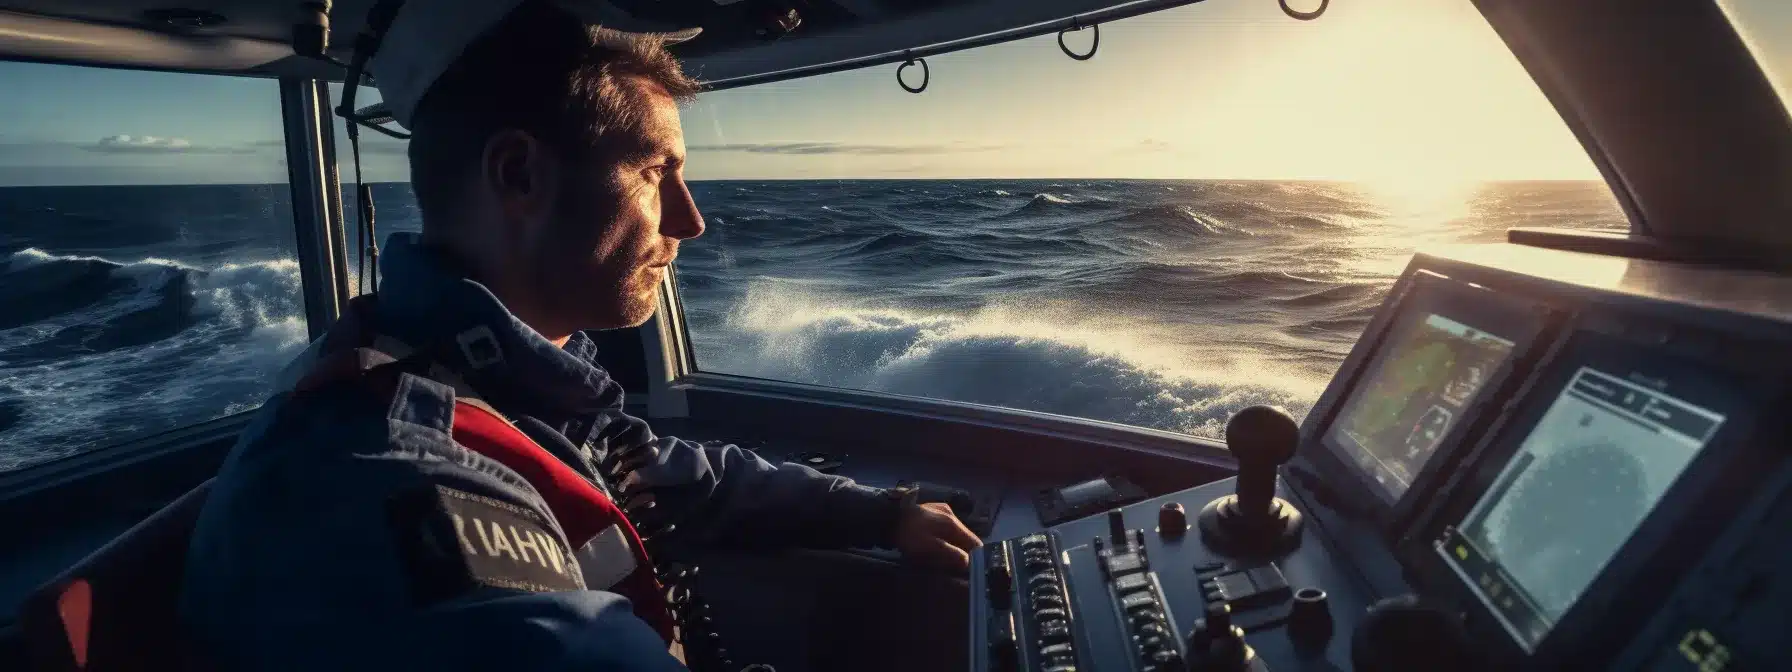 A Person Steering A Ship With A Swoosh-Shaped Helm, Surrounded By A Vast Ocean With Waves Reflecting The Brand'S Identity.